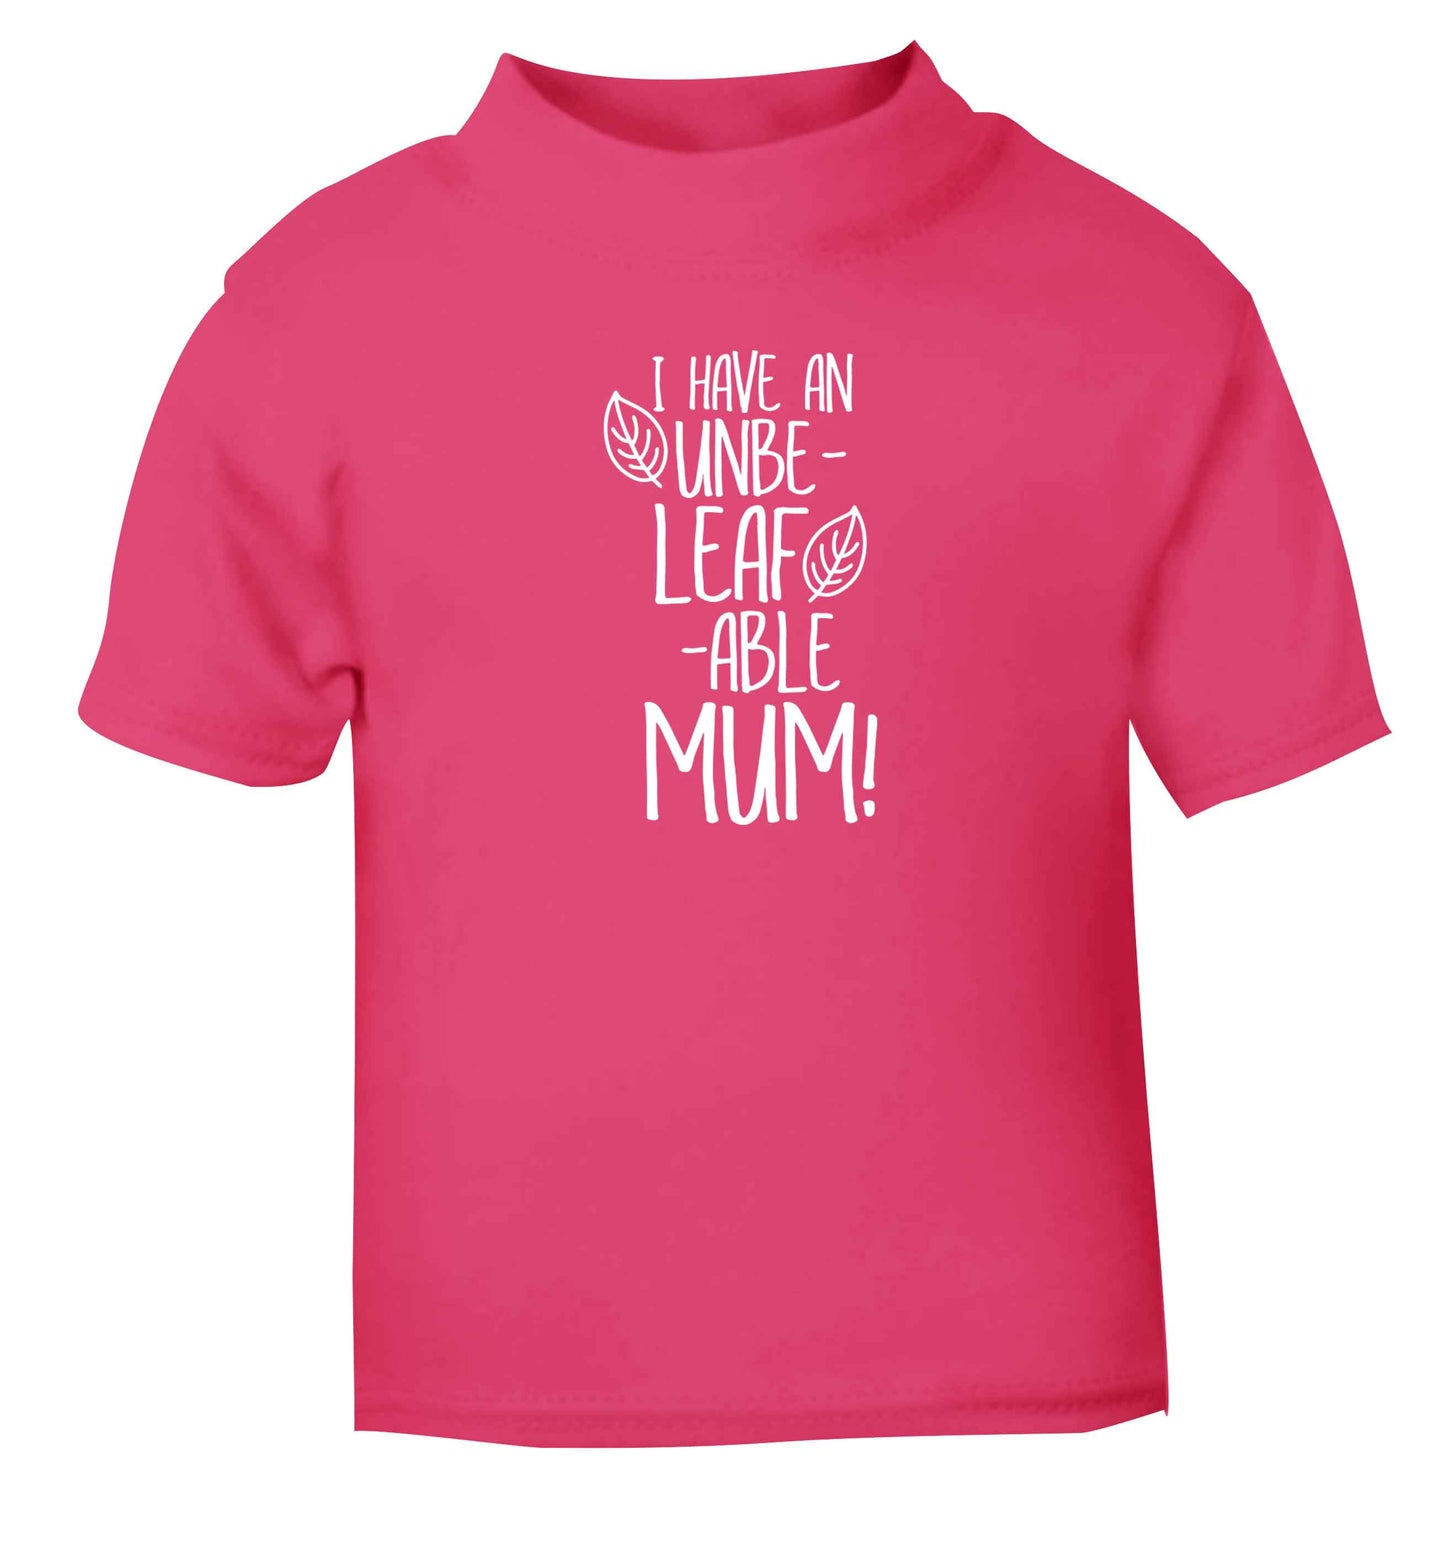 I have an unbeleafable mum! pink baby toddler Tshirt 2 Years